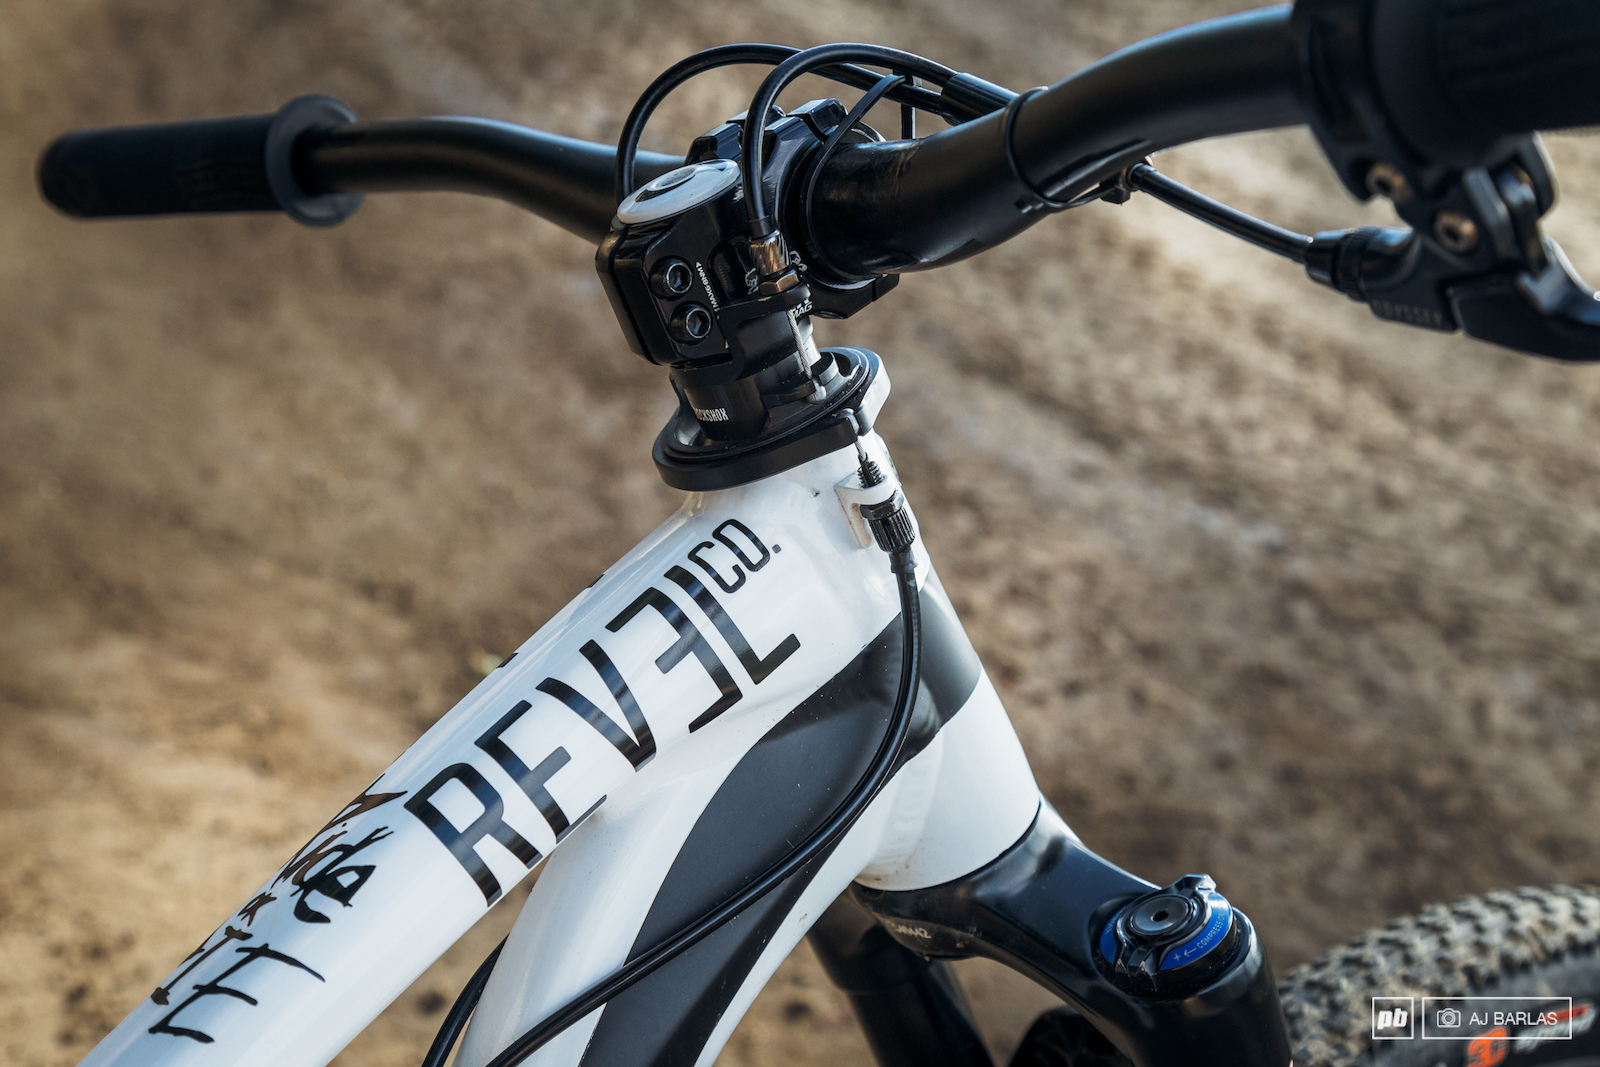 Brandon Semenuk's Trek Ticket S slopestyle bike - Brandon was one of, if not the first name rider, to begin running gyro's on his mtb. Now a number of slope riders are running them.